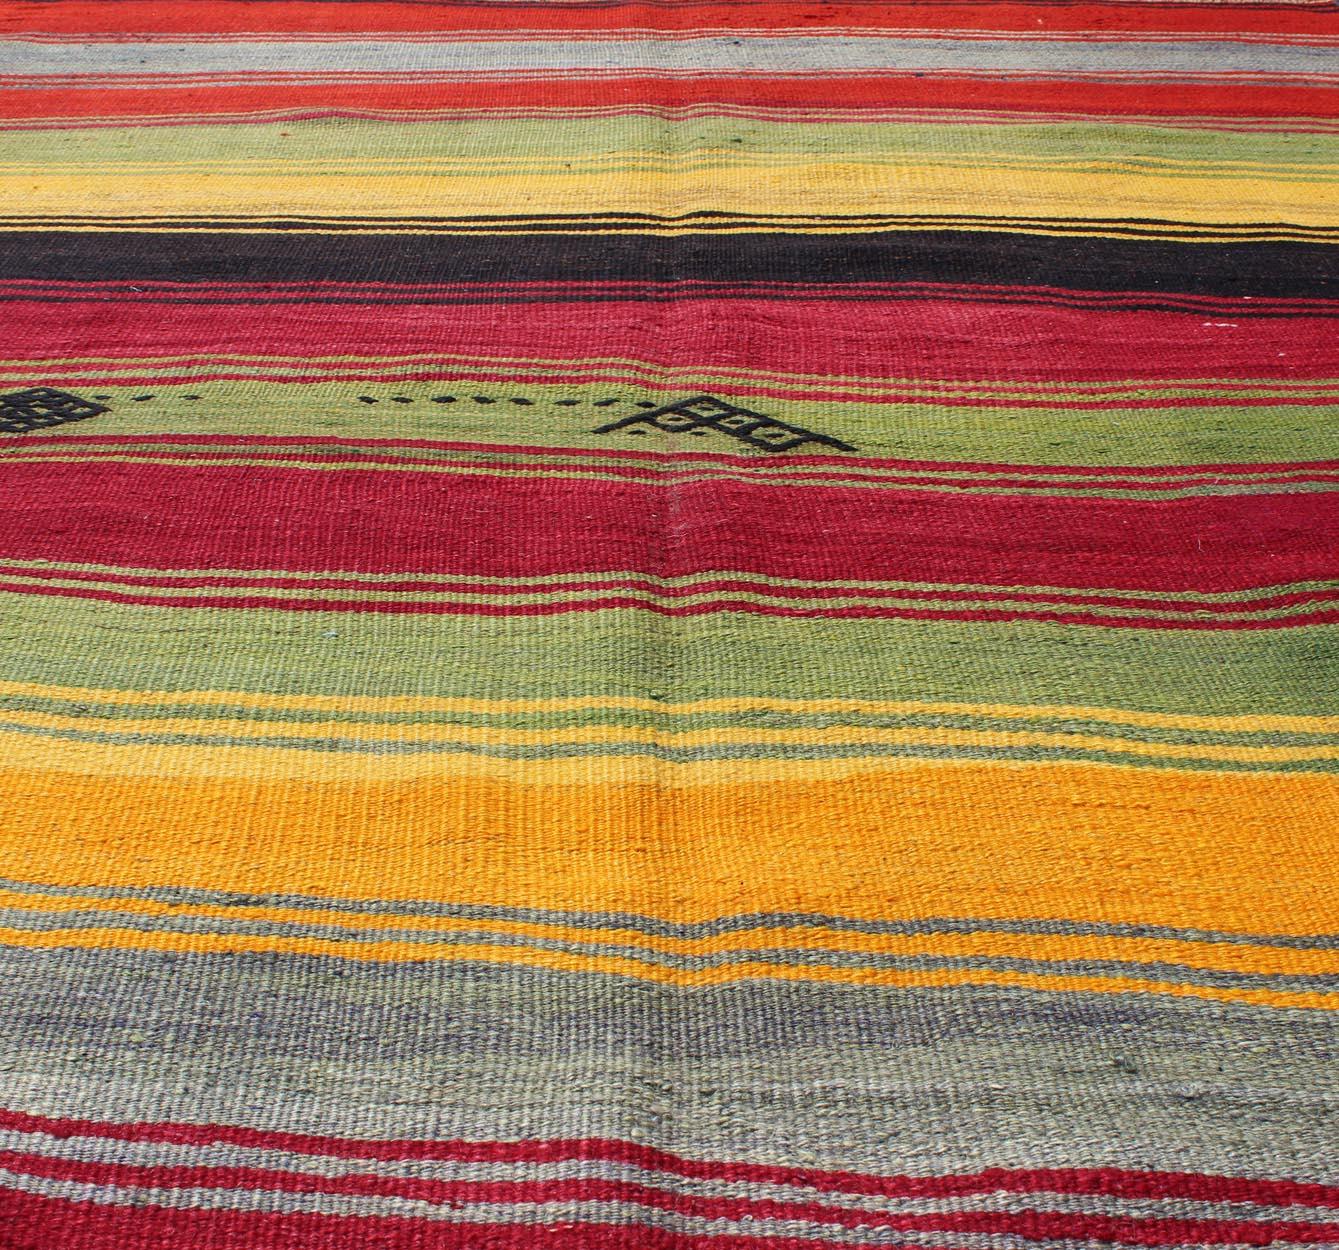 Wool Bright & Colorful Vintage Turkish Kilim Rug in Stripes Design with Vivid Colors For Sale